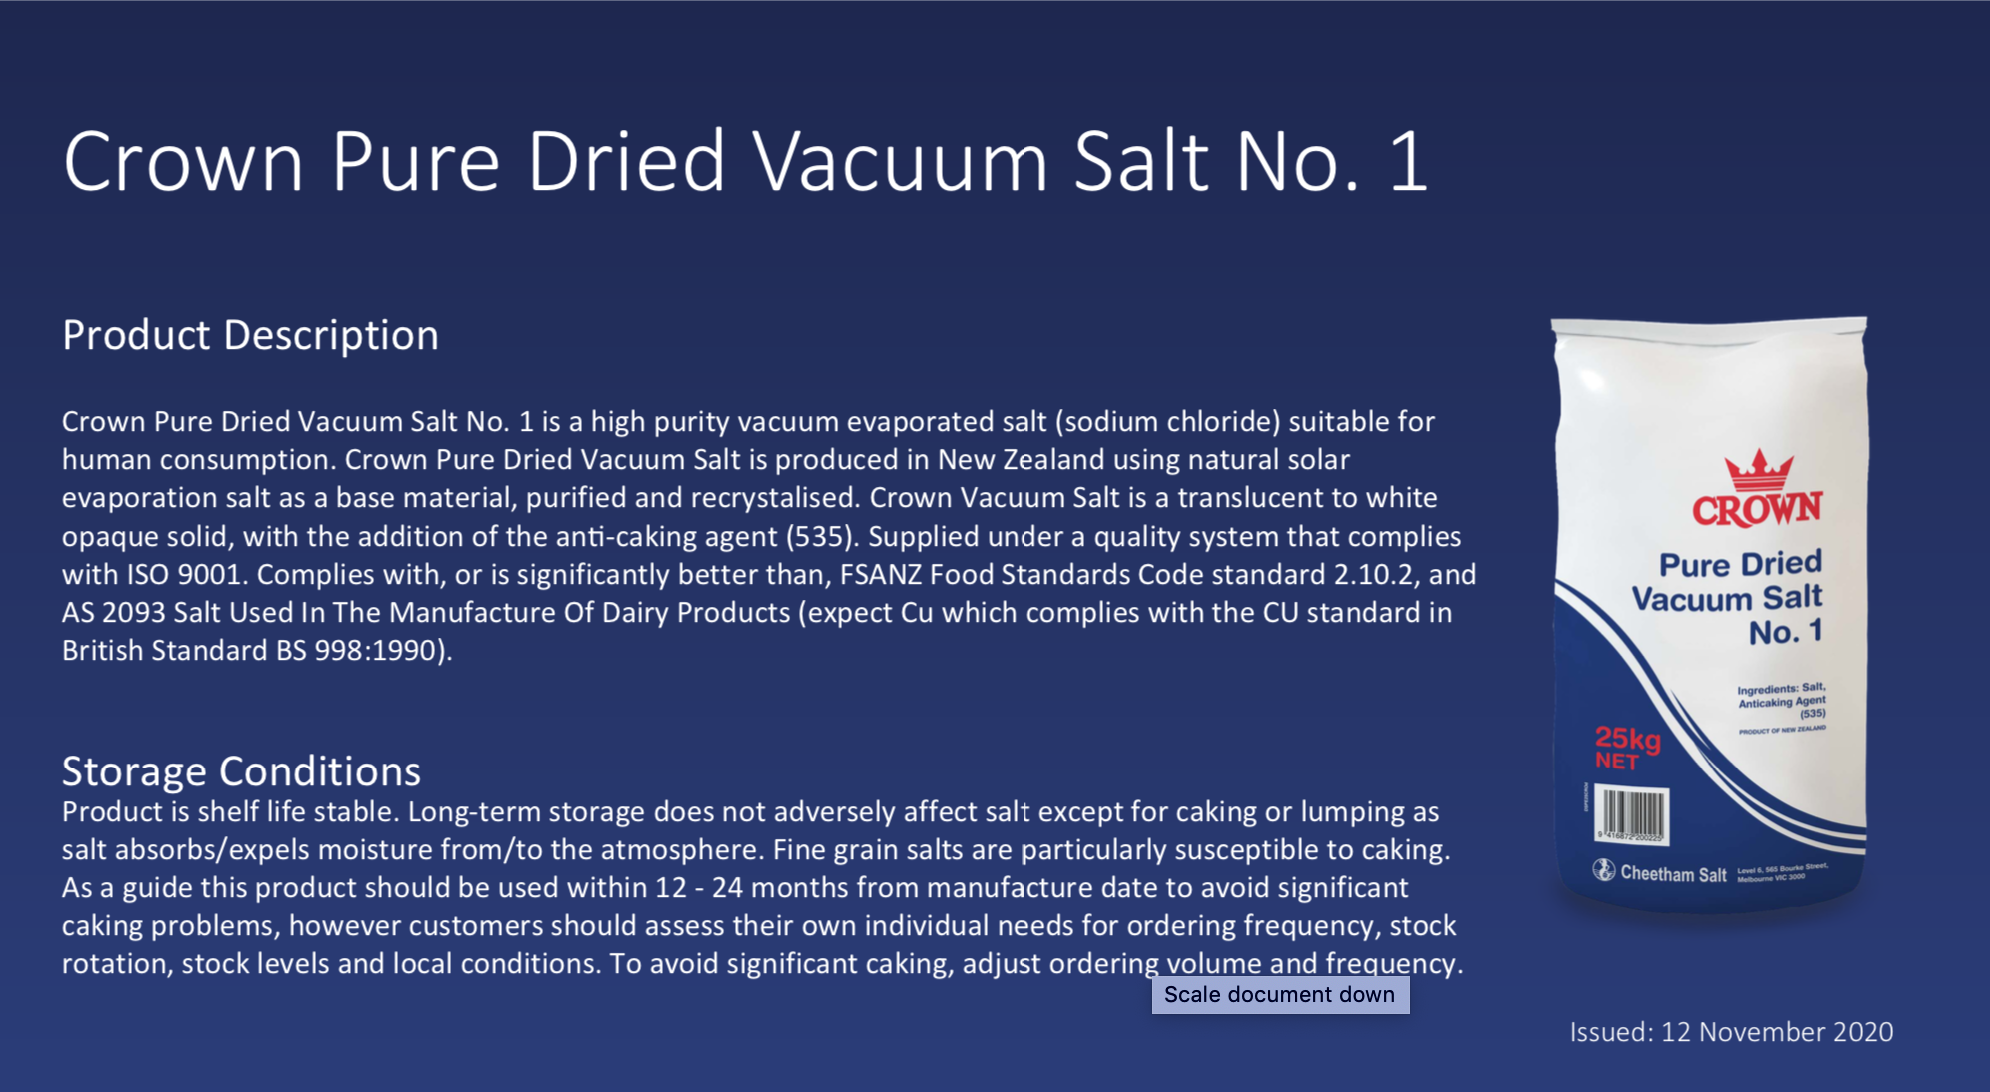 An image of Crown Pure Dried Vacuum Salt product description and storage conditions